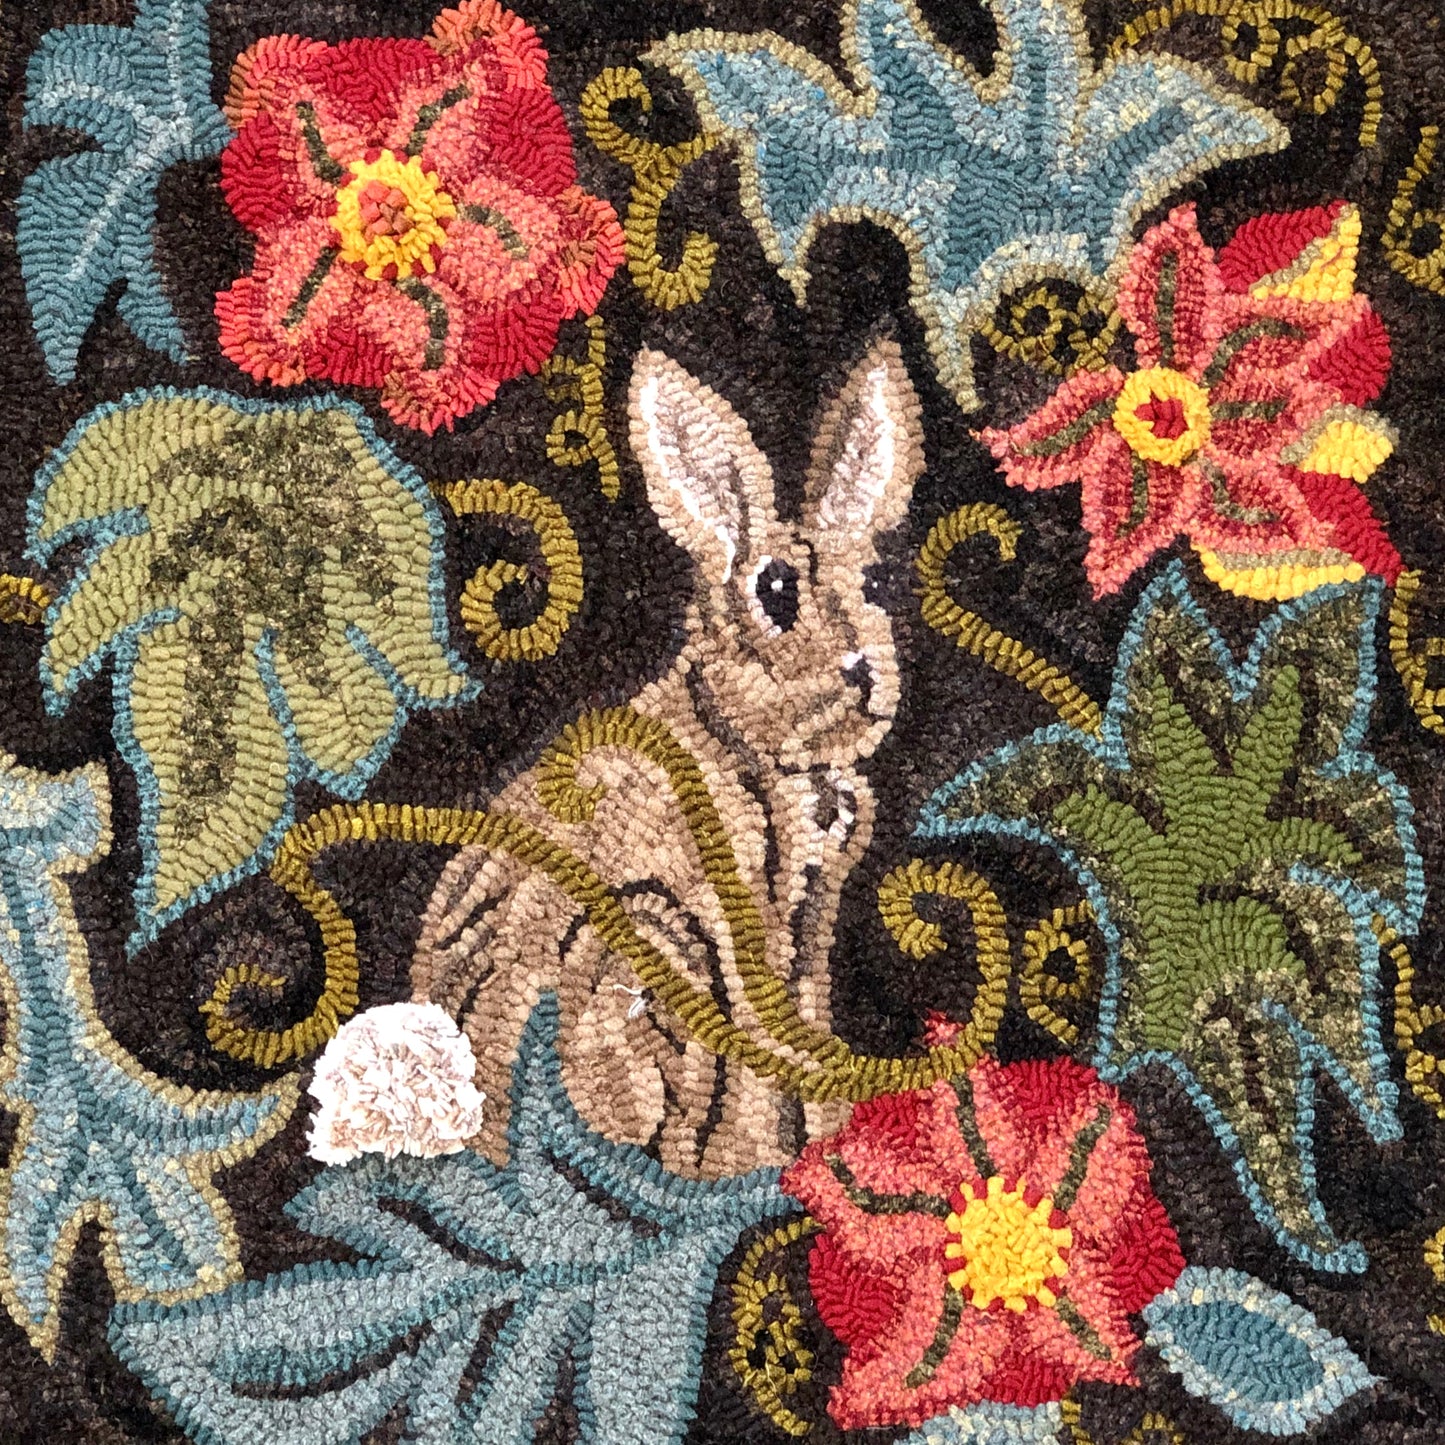 Garden Rabbit Rug Hooking Pattern on Paper- Pattern designed to be enlarged.  perfect for rug hooking and oxford rug punch needle. Lovely rabbit pattern with flowers and leaves.